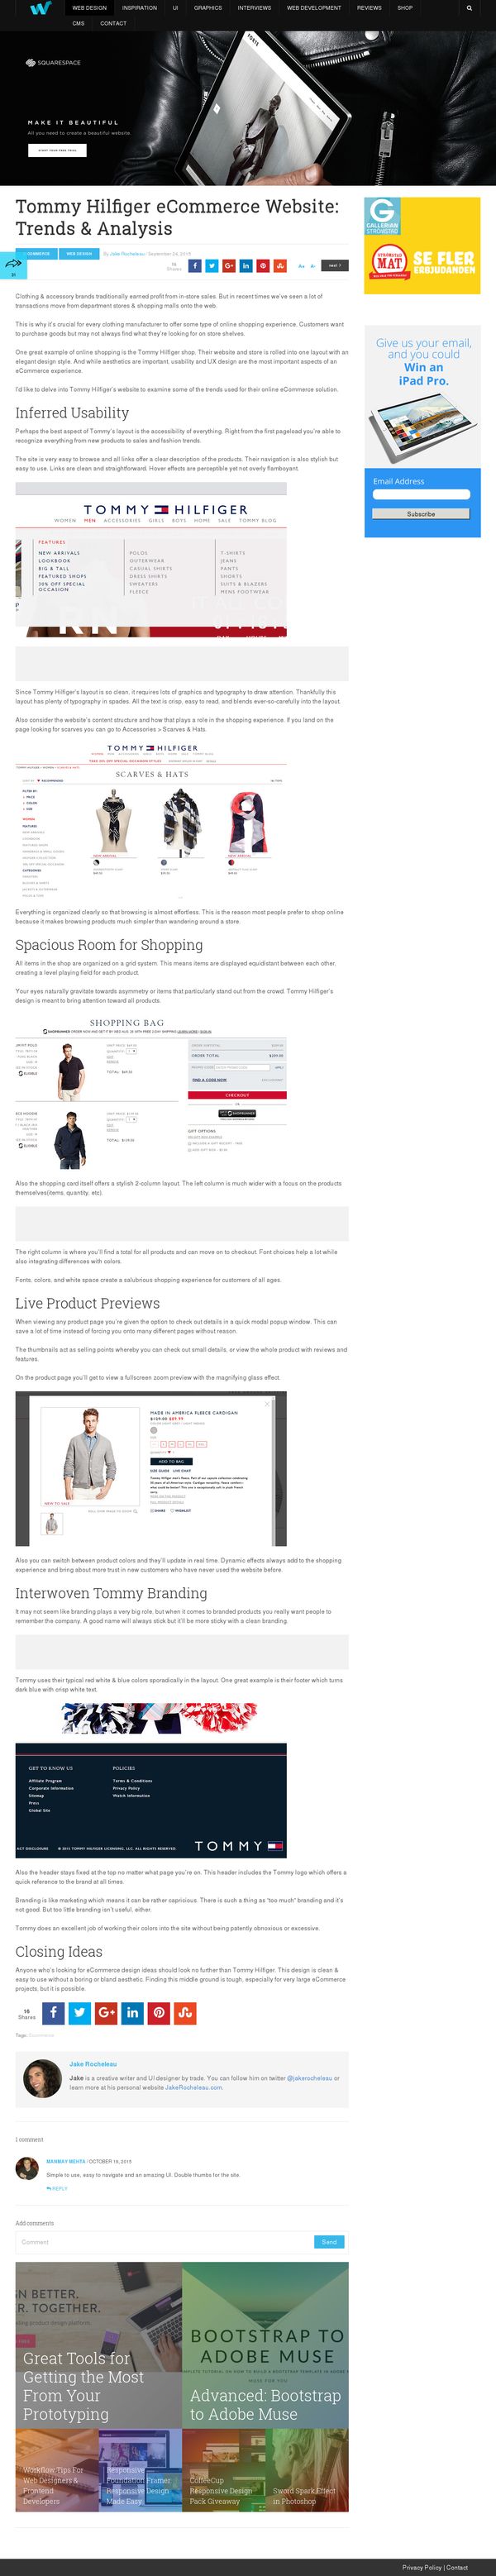 Tommy Hilfiger eCommerce Website: Trends & Analysis